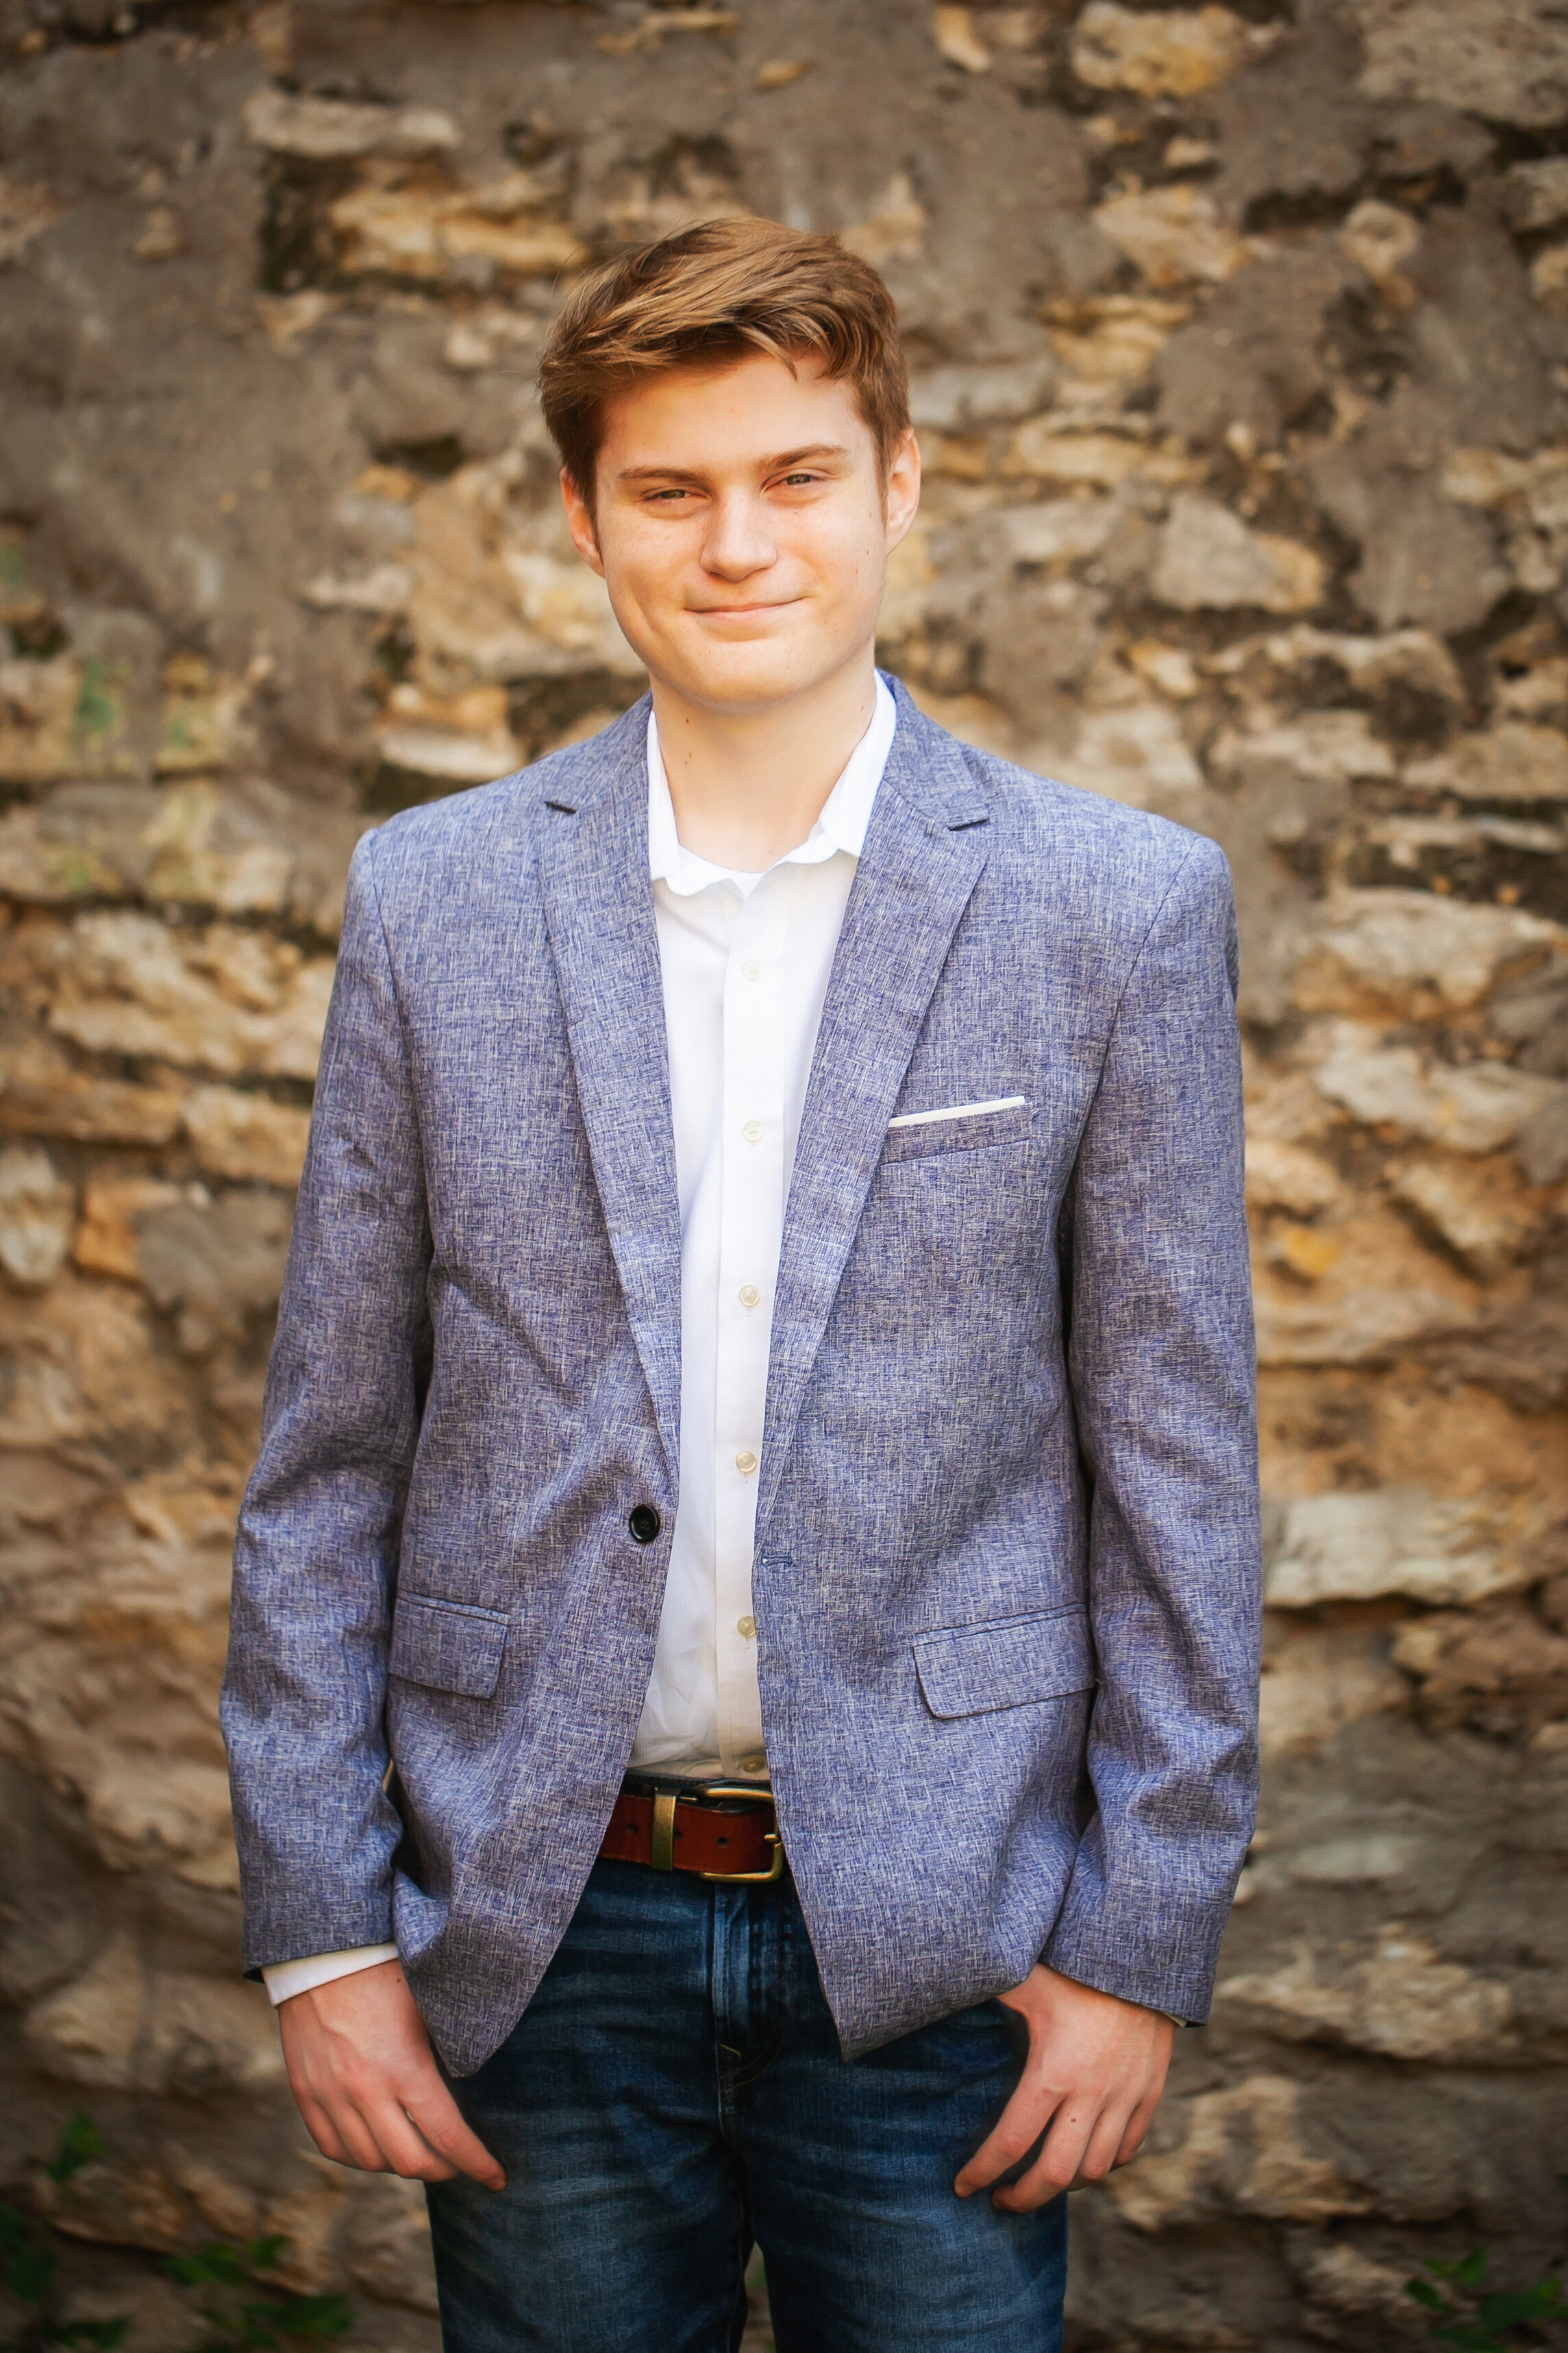 senior-gentleman-sportcoat-suit-style-business-casual-rock-wall-urban-background-where-to-take-senior-pictures-keller-texas-lacey-whitmer-photo-design